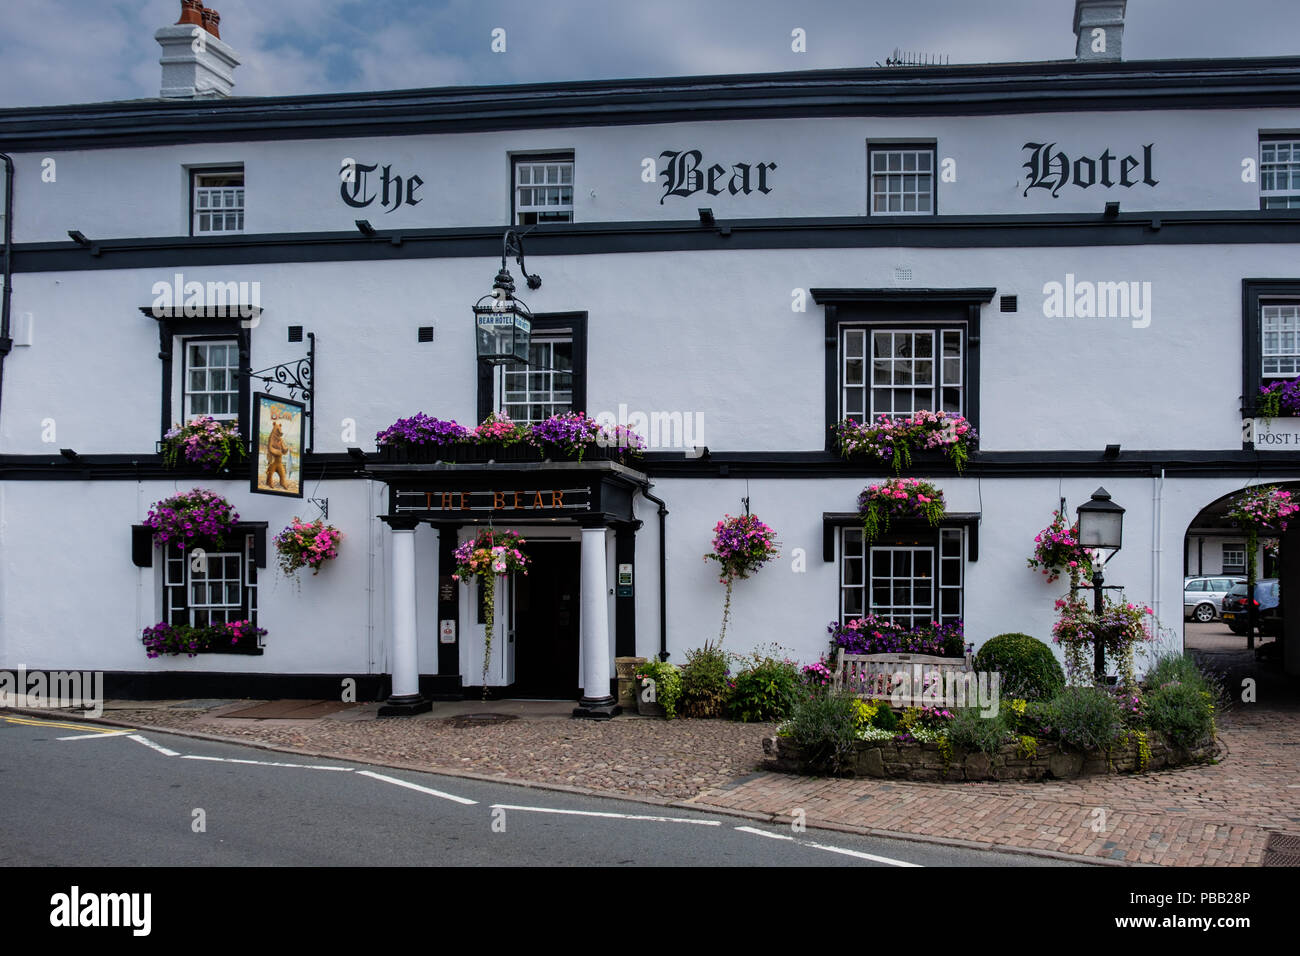 The Bear Hotel in Crickhowell, Powys, Wales Stock Photo